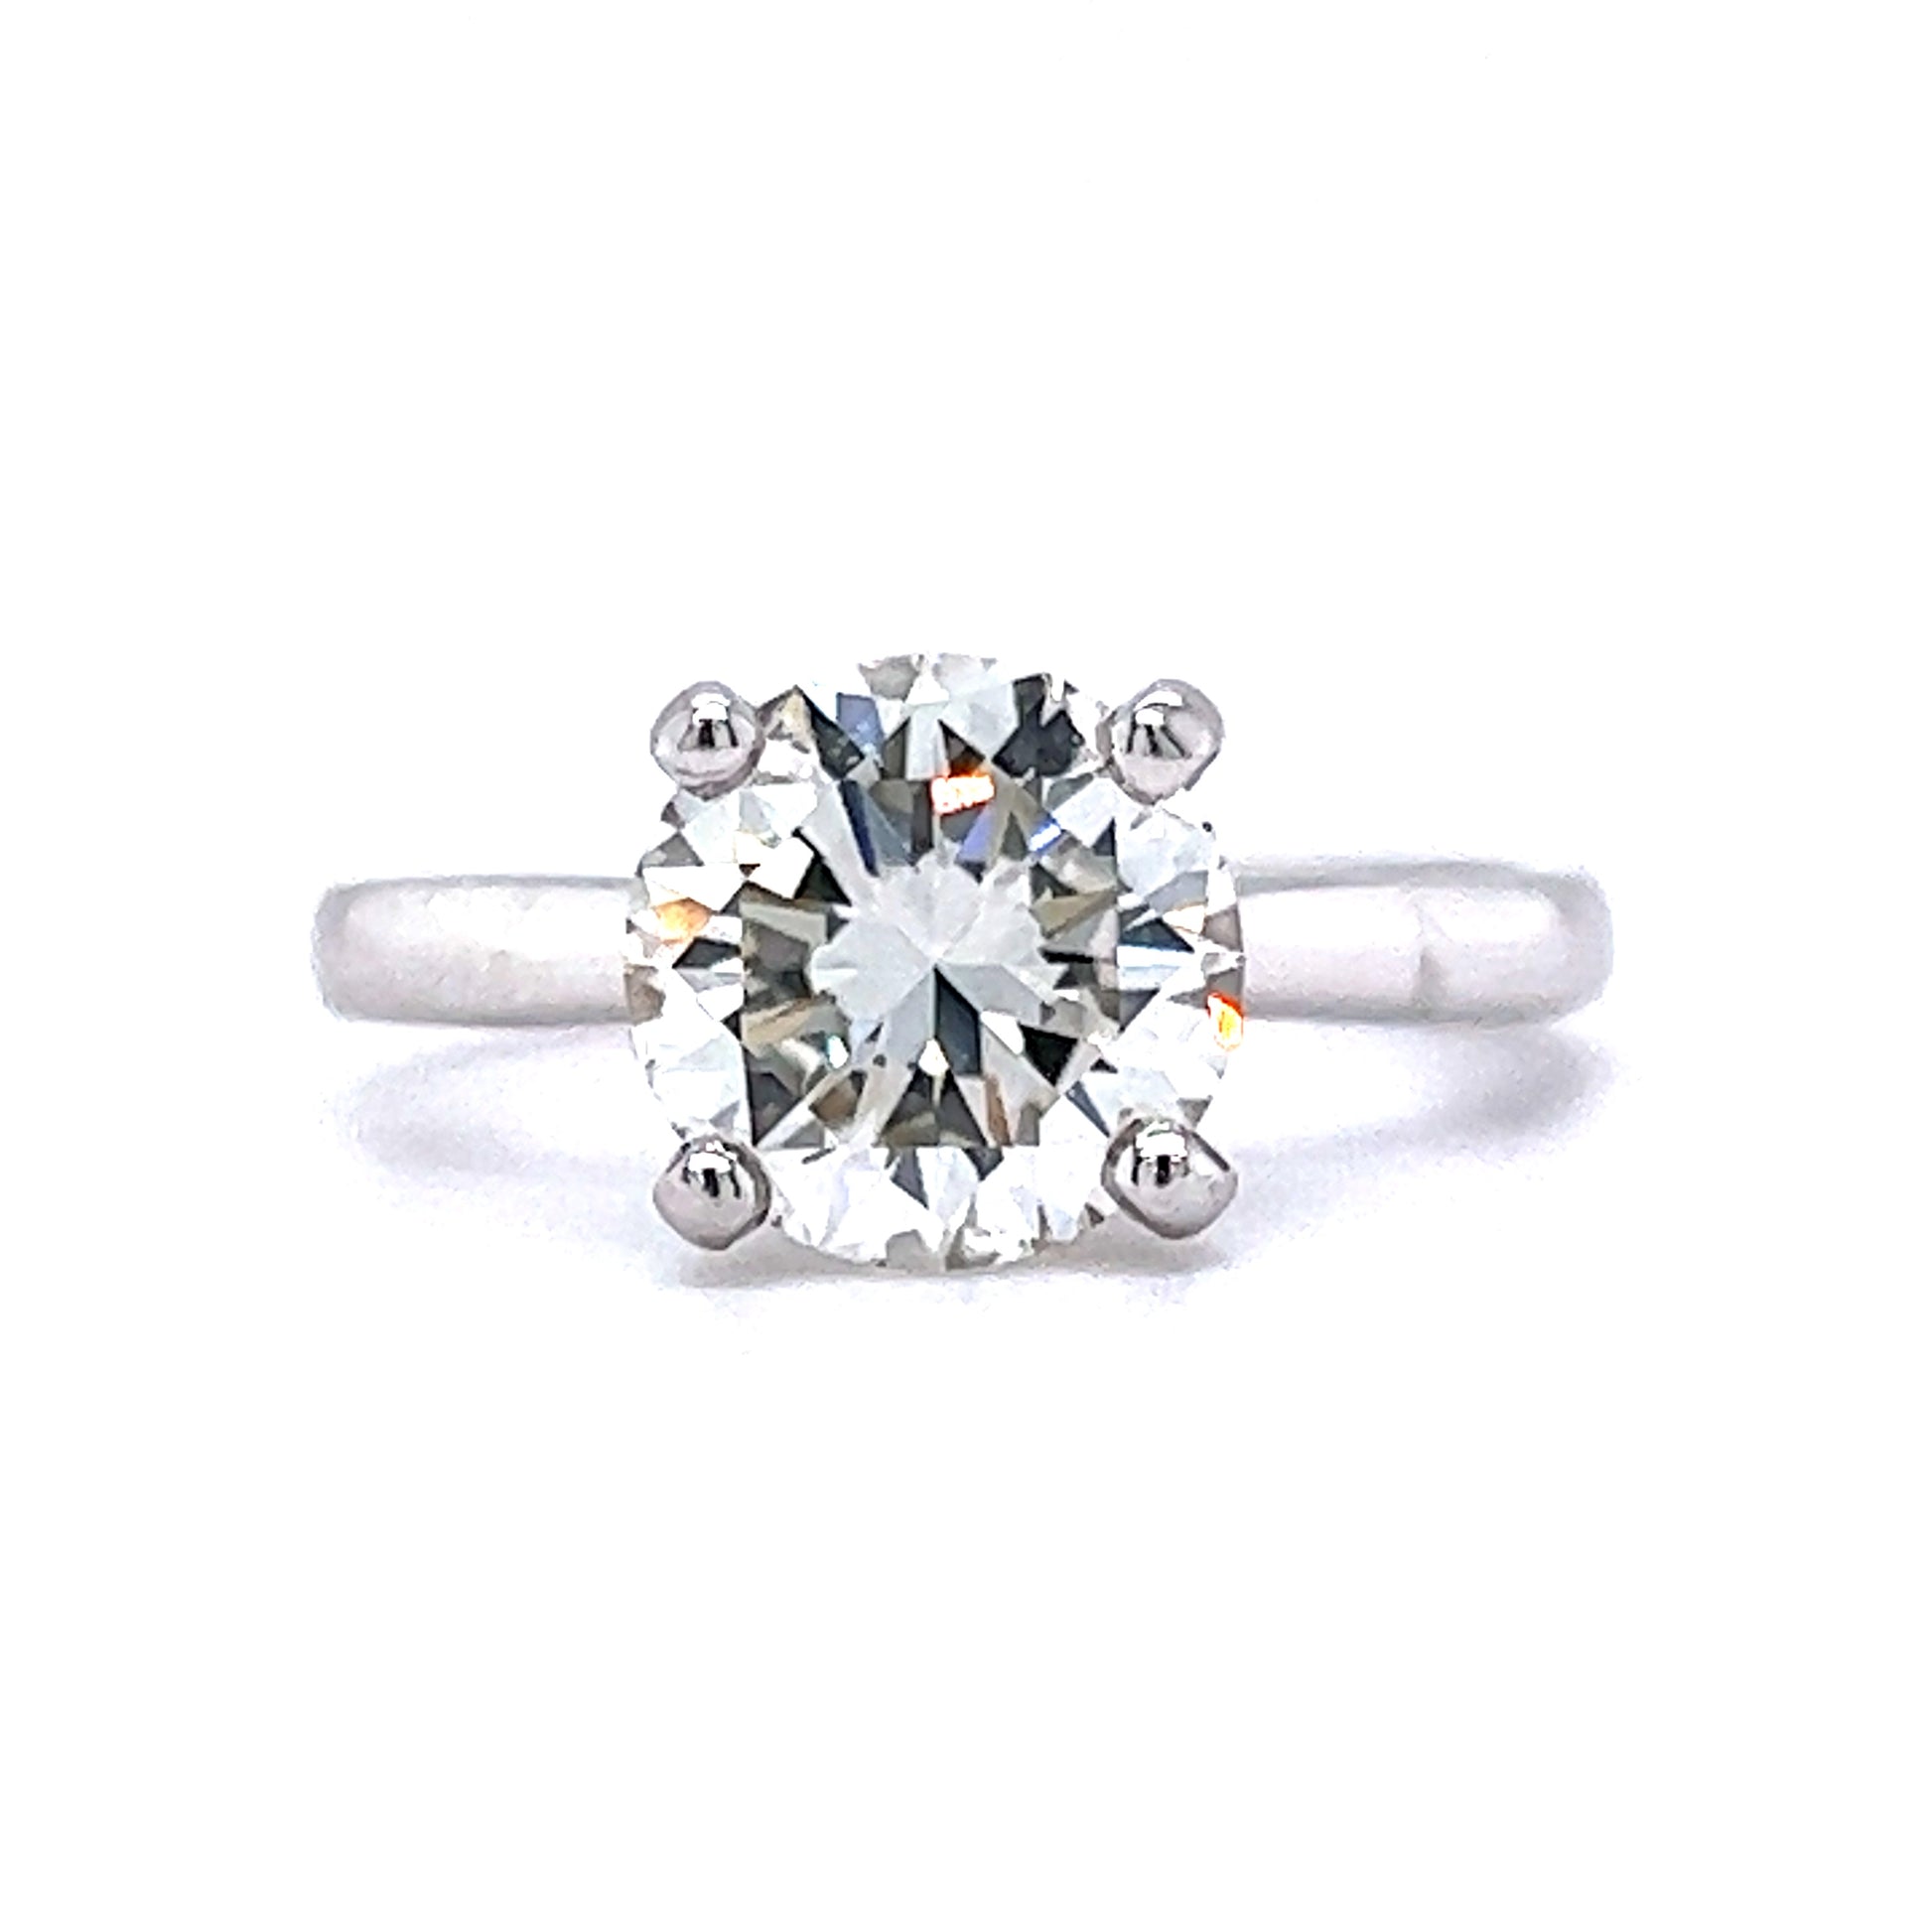 2.55 GIA Diamond Solitaire Engagement Ring in 14k White Gold